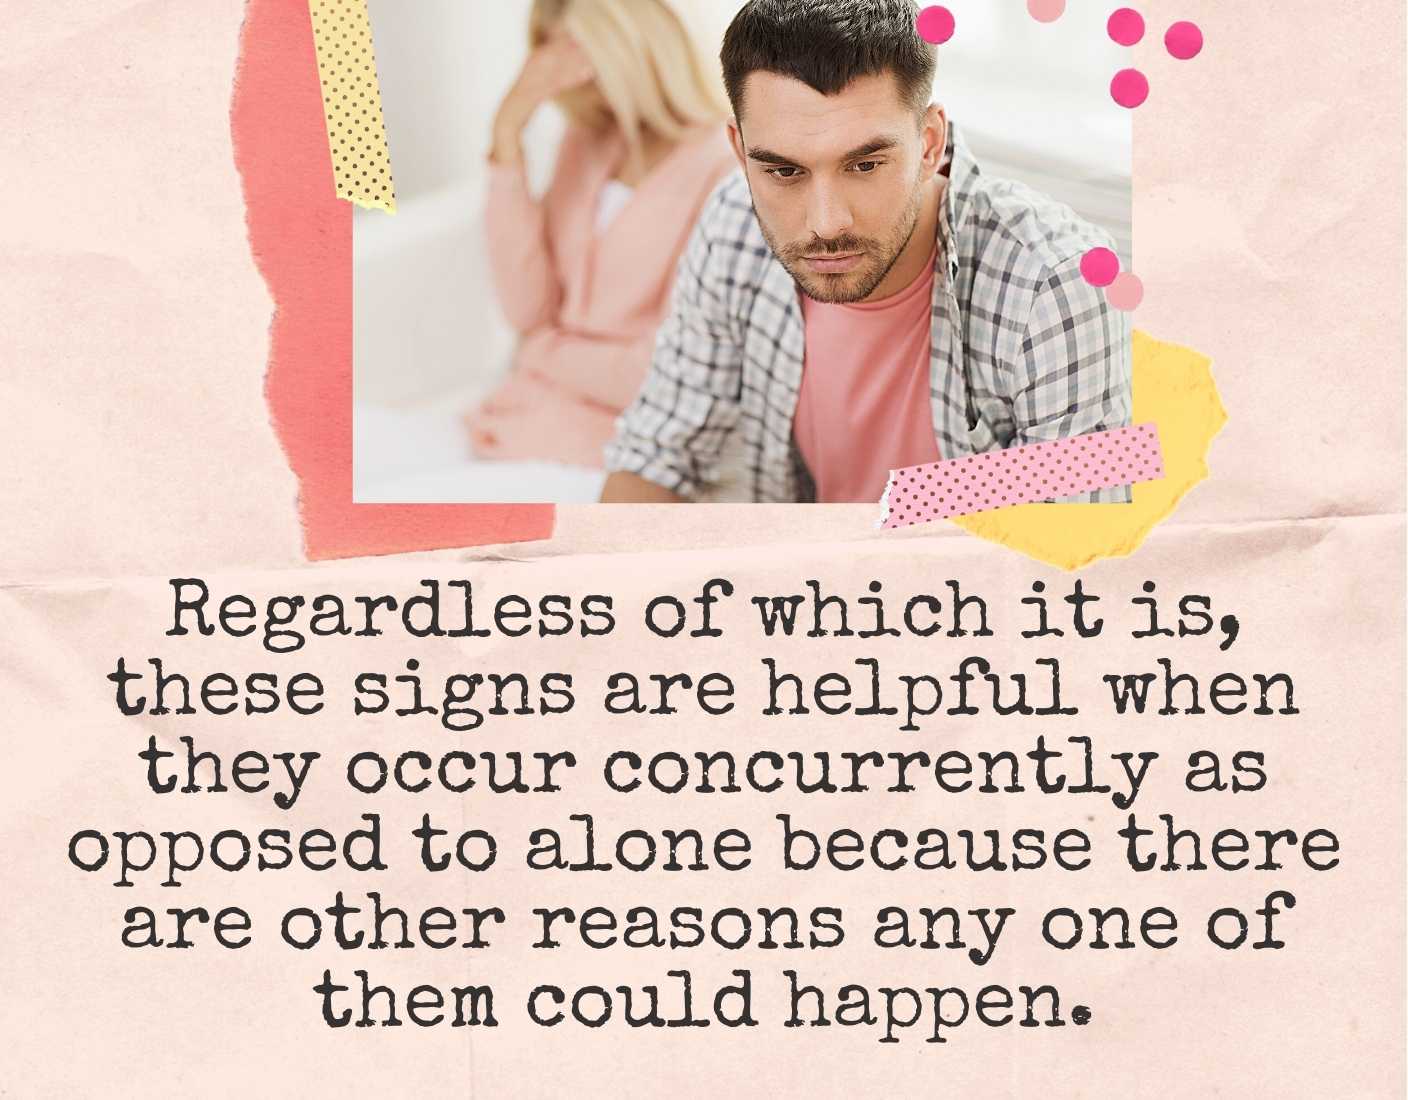 Regardless of which it is, these signs are helpful when they occur concurrently as opposed to alone because there are other reasons any one of them could happen.